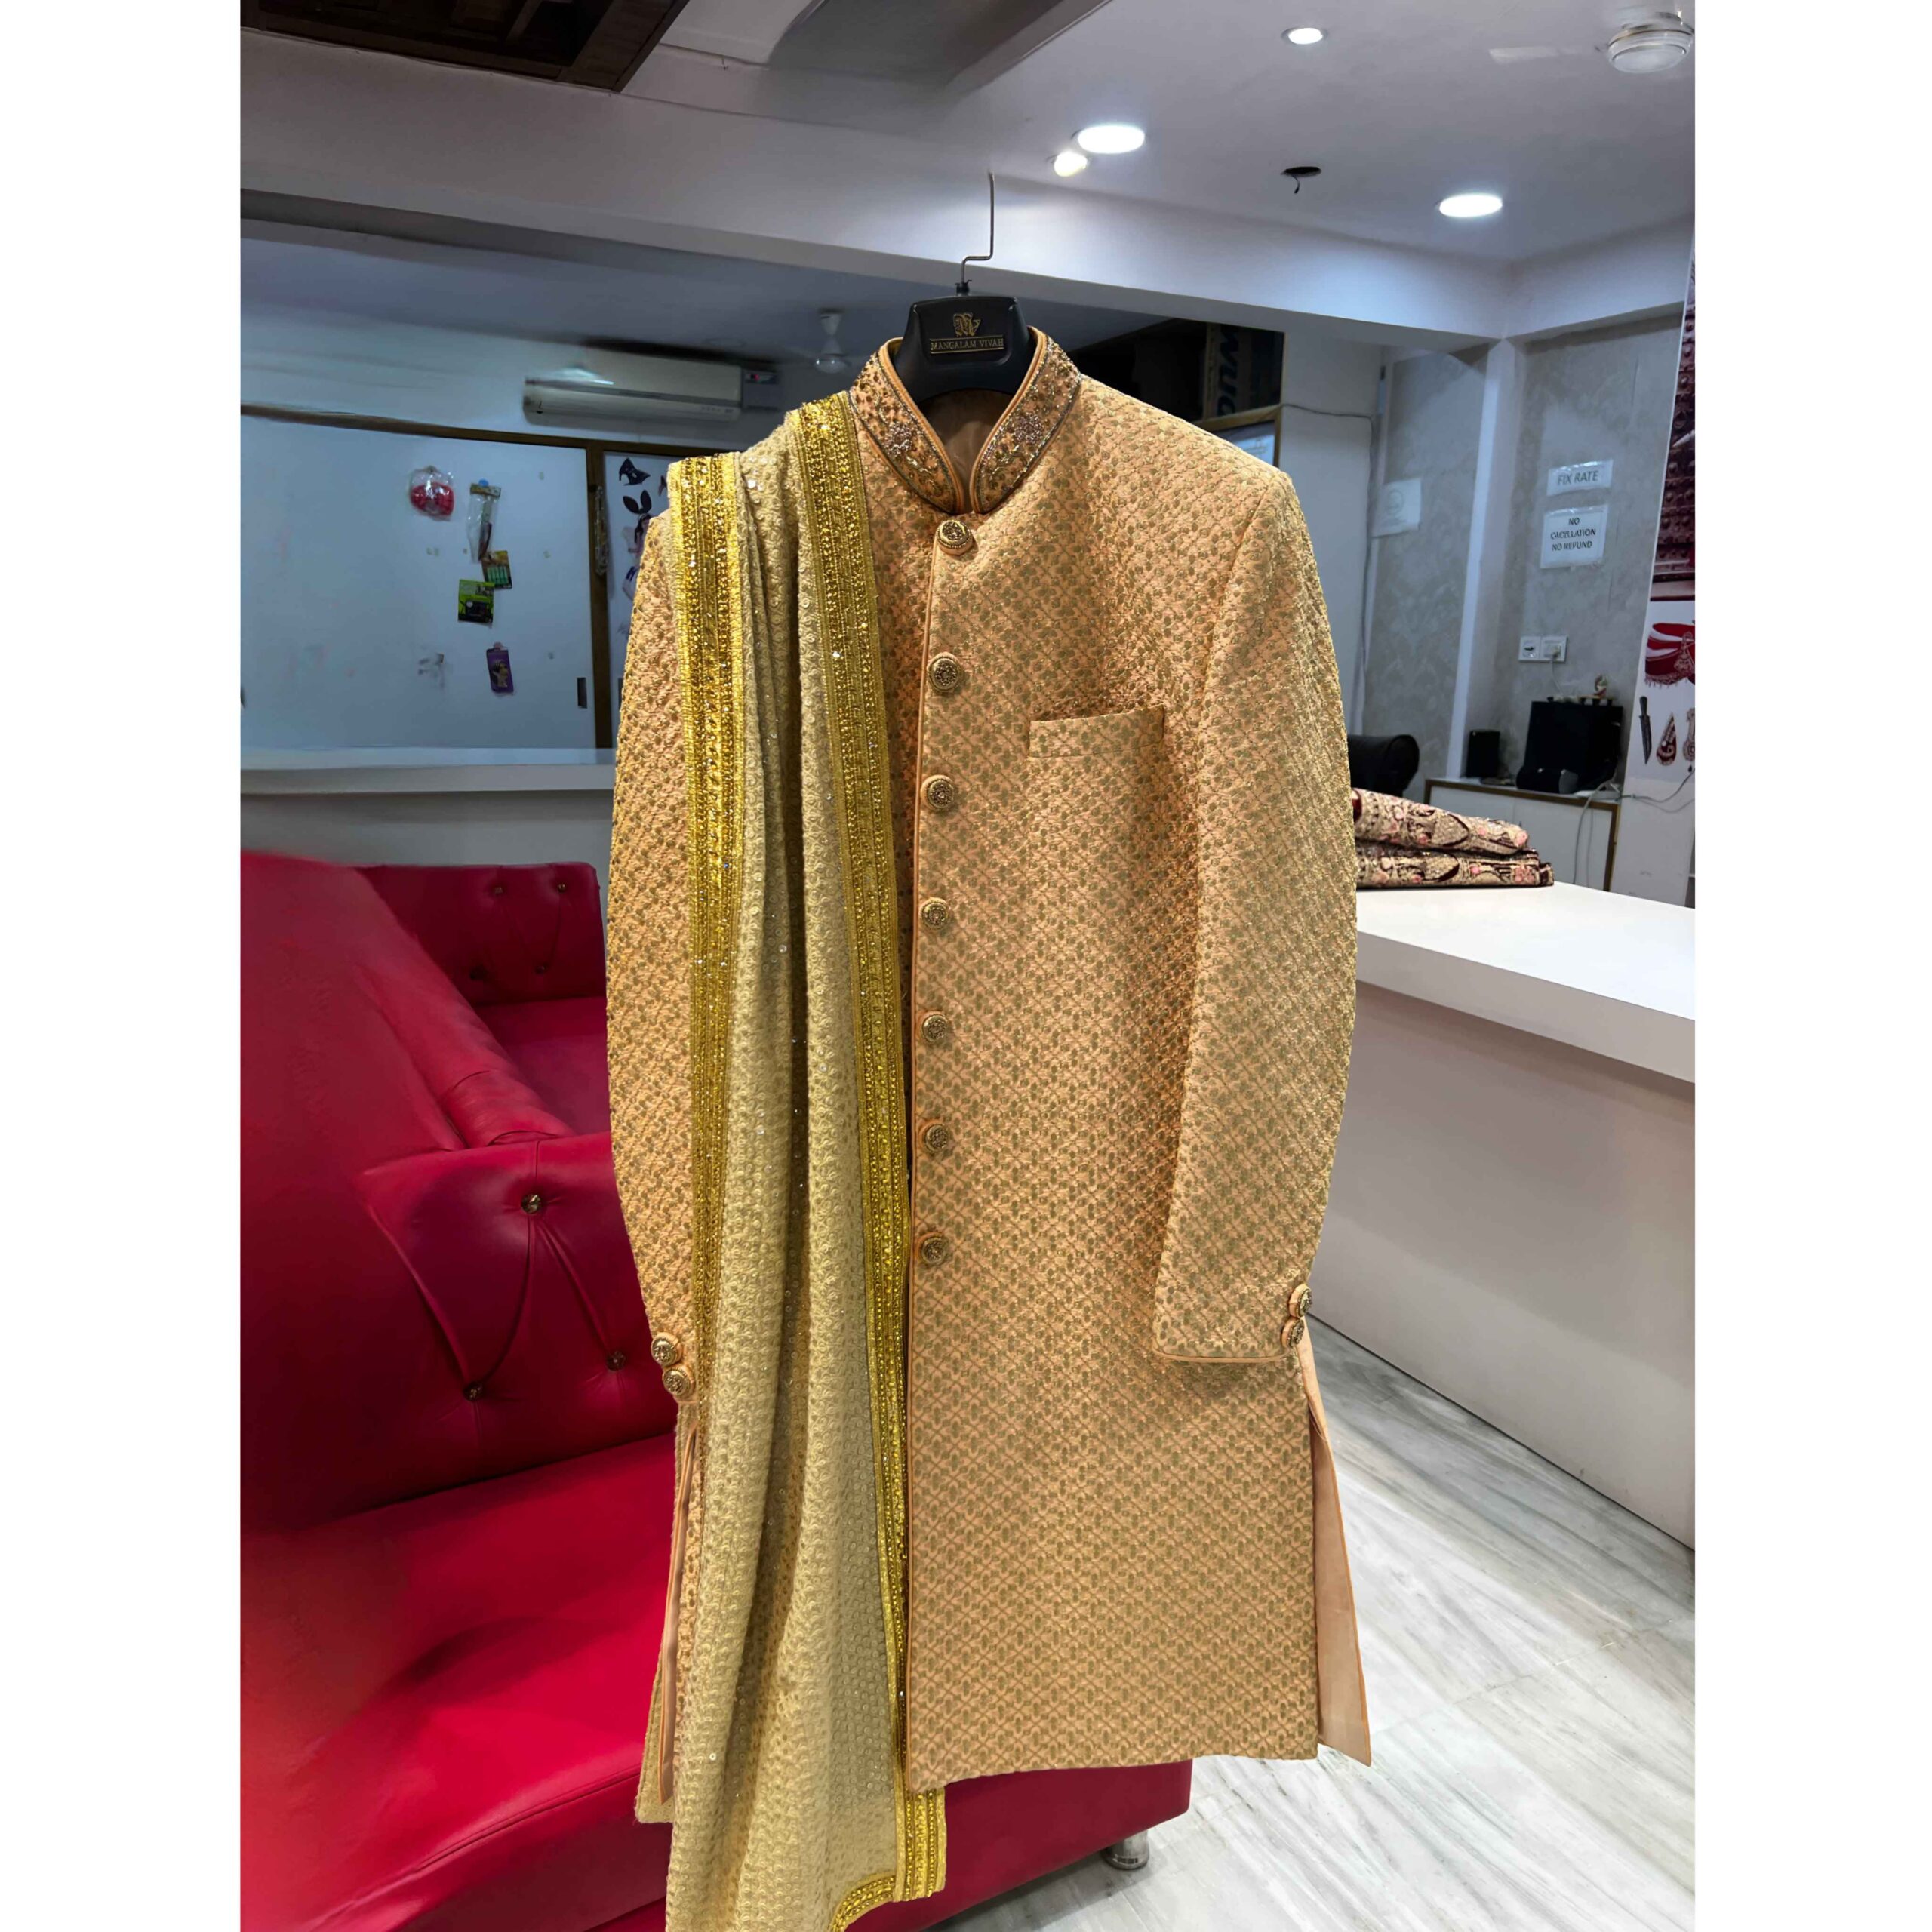 Pitch Golden Embroidery sherwani for men on rent in udaipur